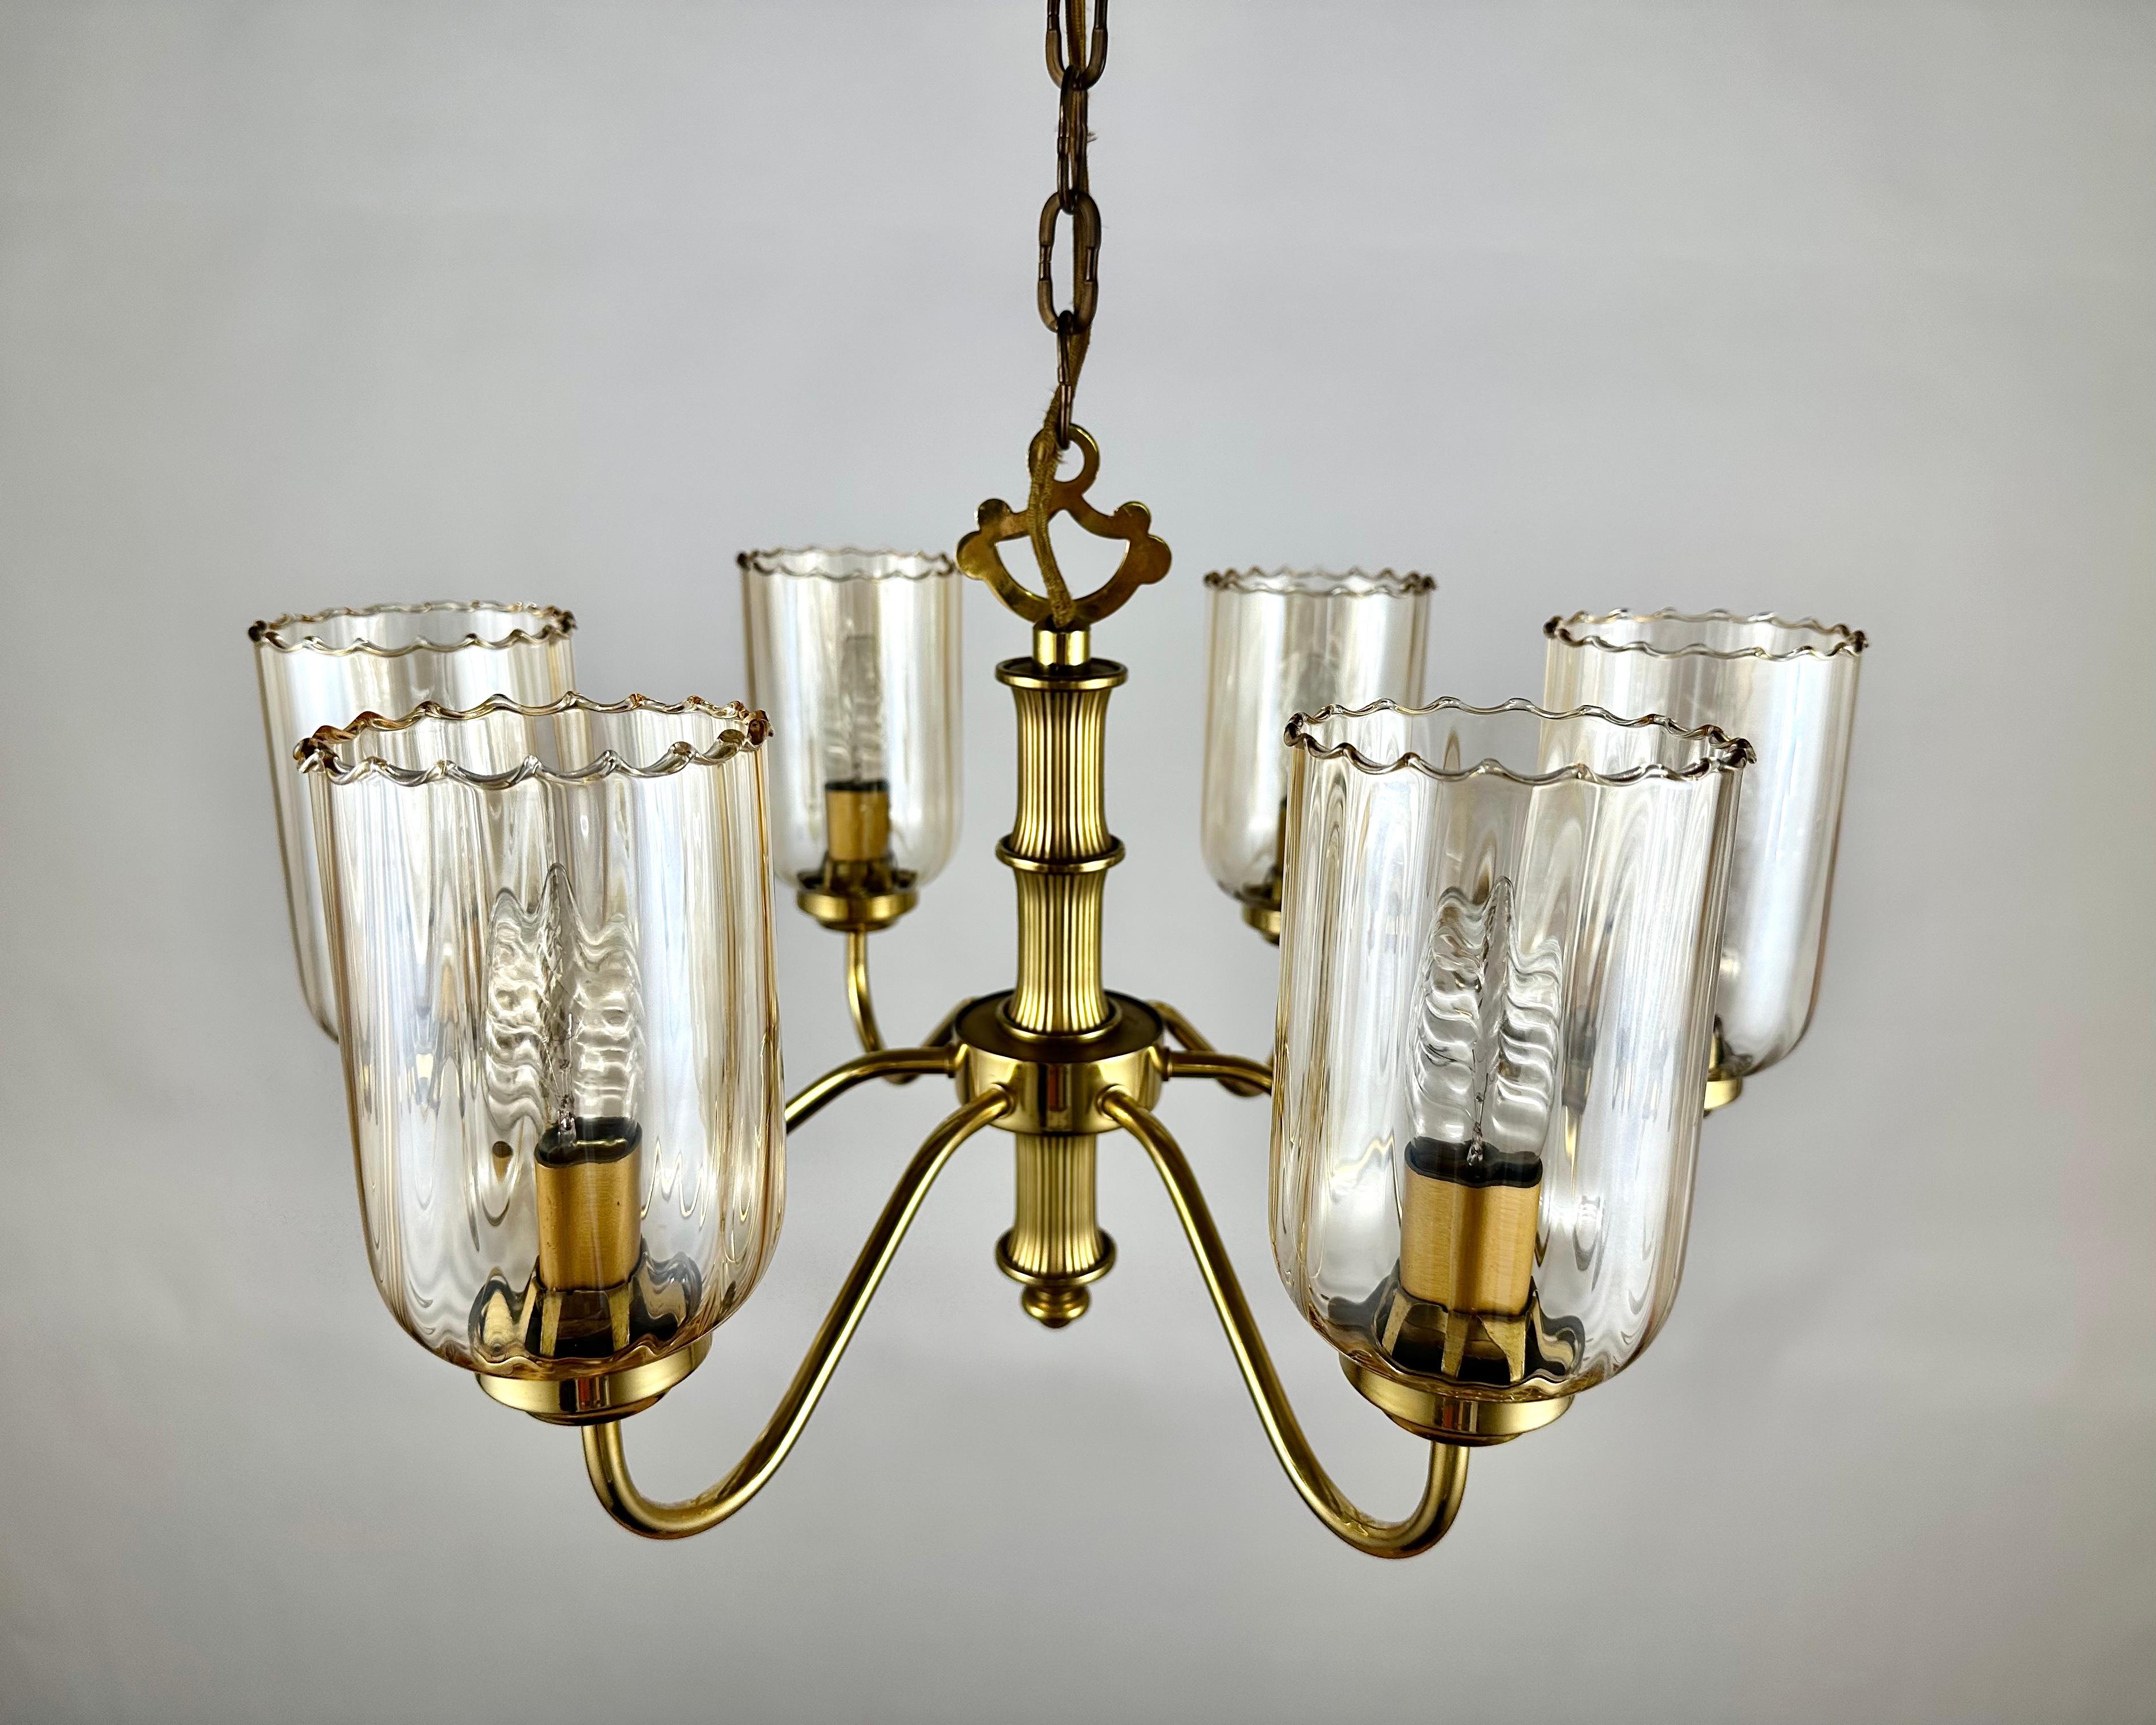 Brass Vintage Ceiling Chandelier With Six Glass Lampshades, Germany, 1970s For Sale